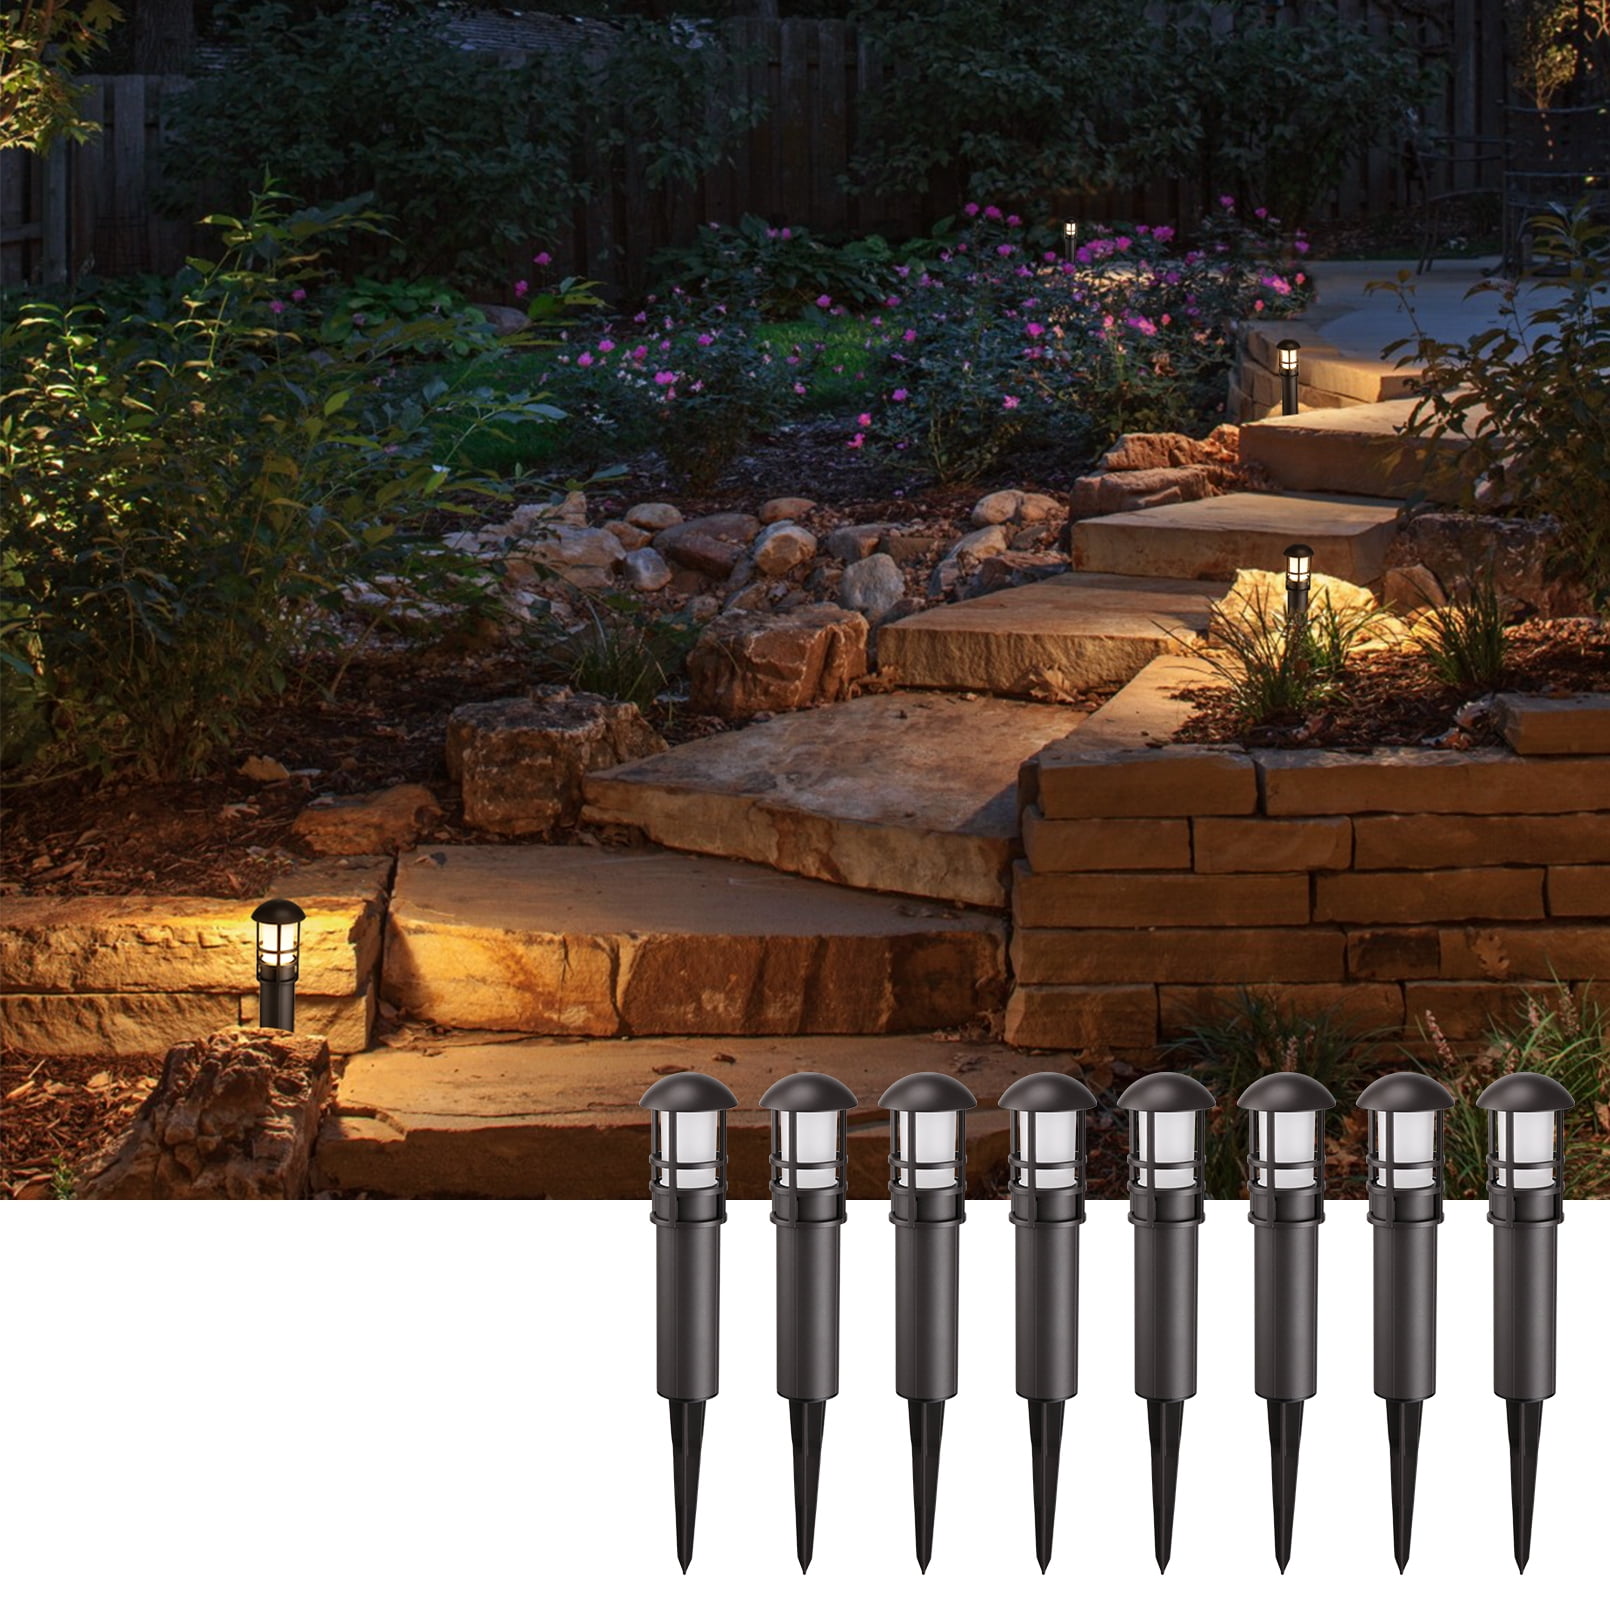 GreenLighting NEW 2-Tier Low Voltage Path Light for Outdoor Landscapes 12 Pack 